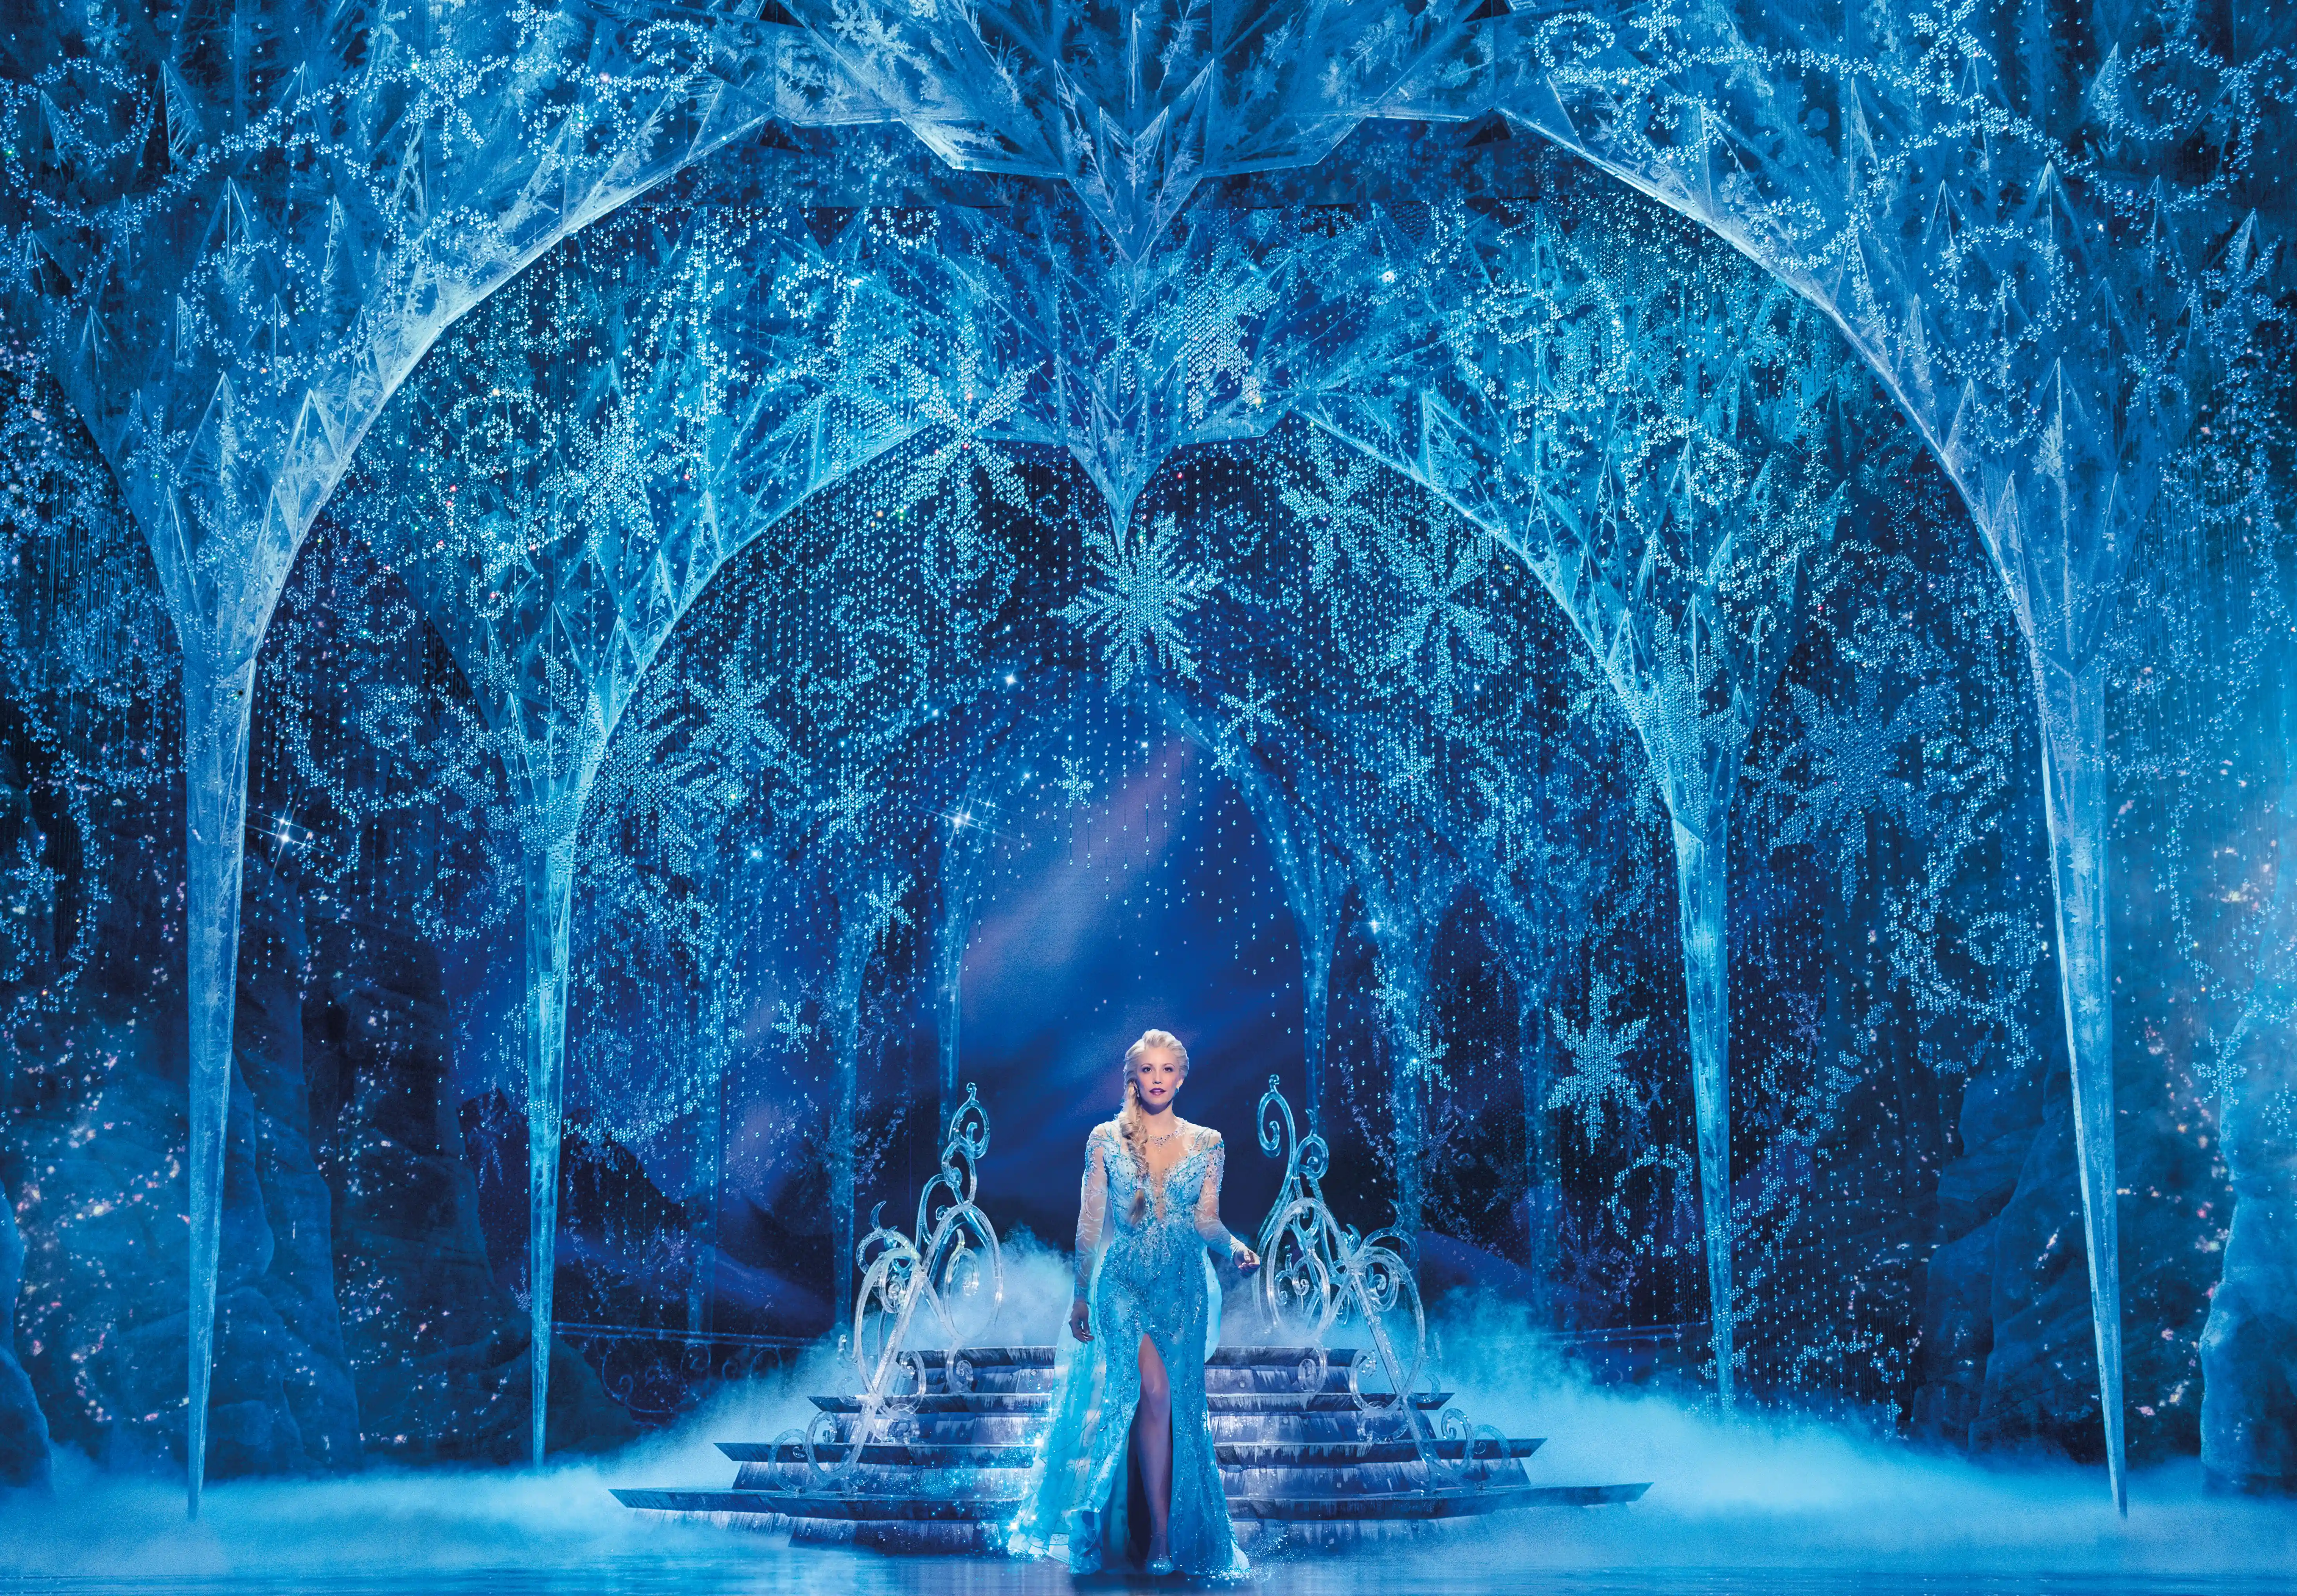 image from Arendelle Awaits: Disney's 'Frozen' Transforms the Moran Theater into a Magical Kingdom